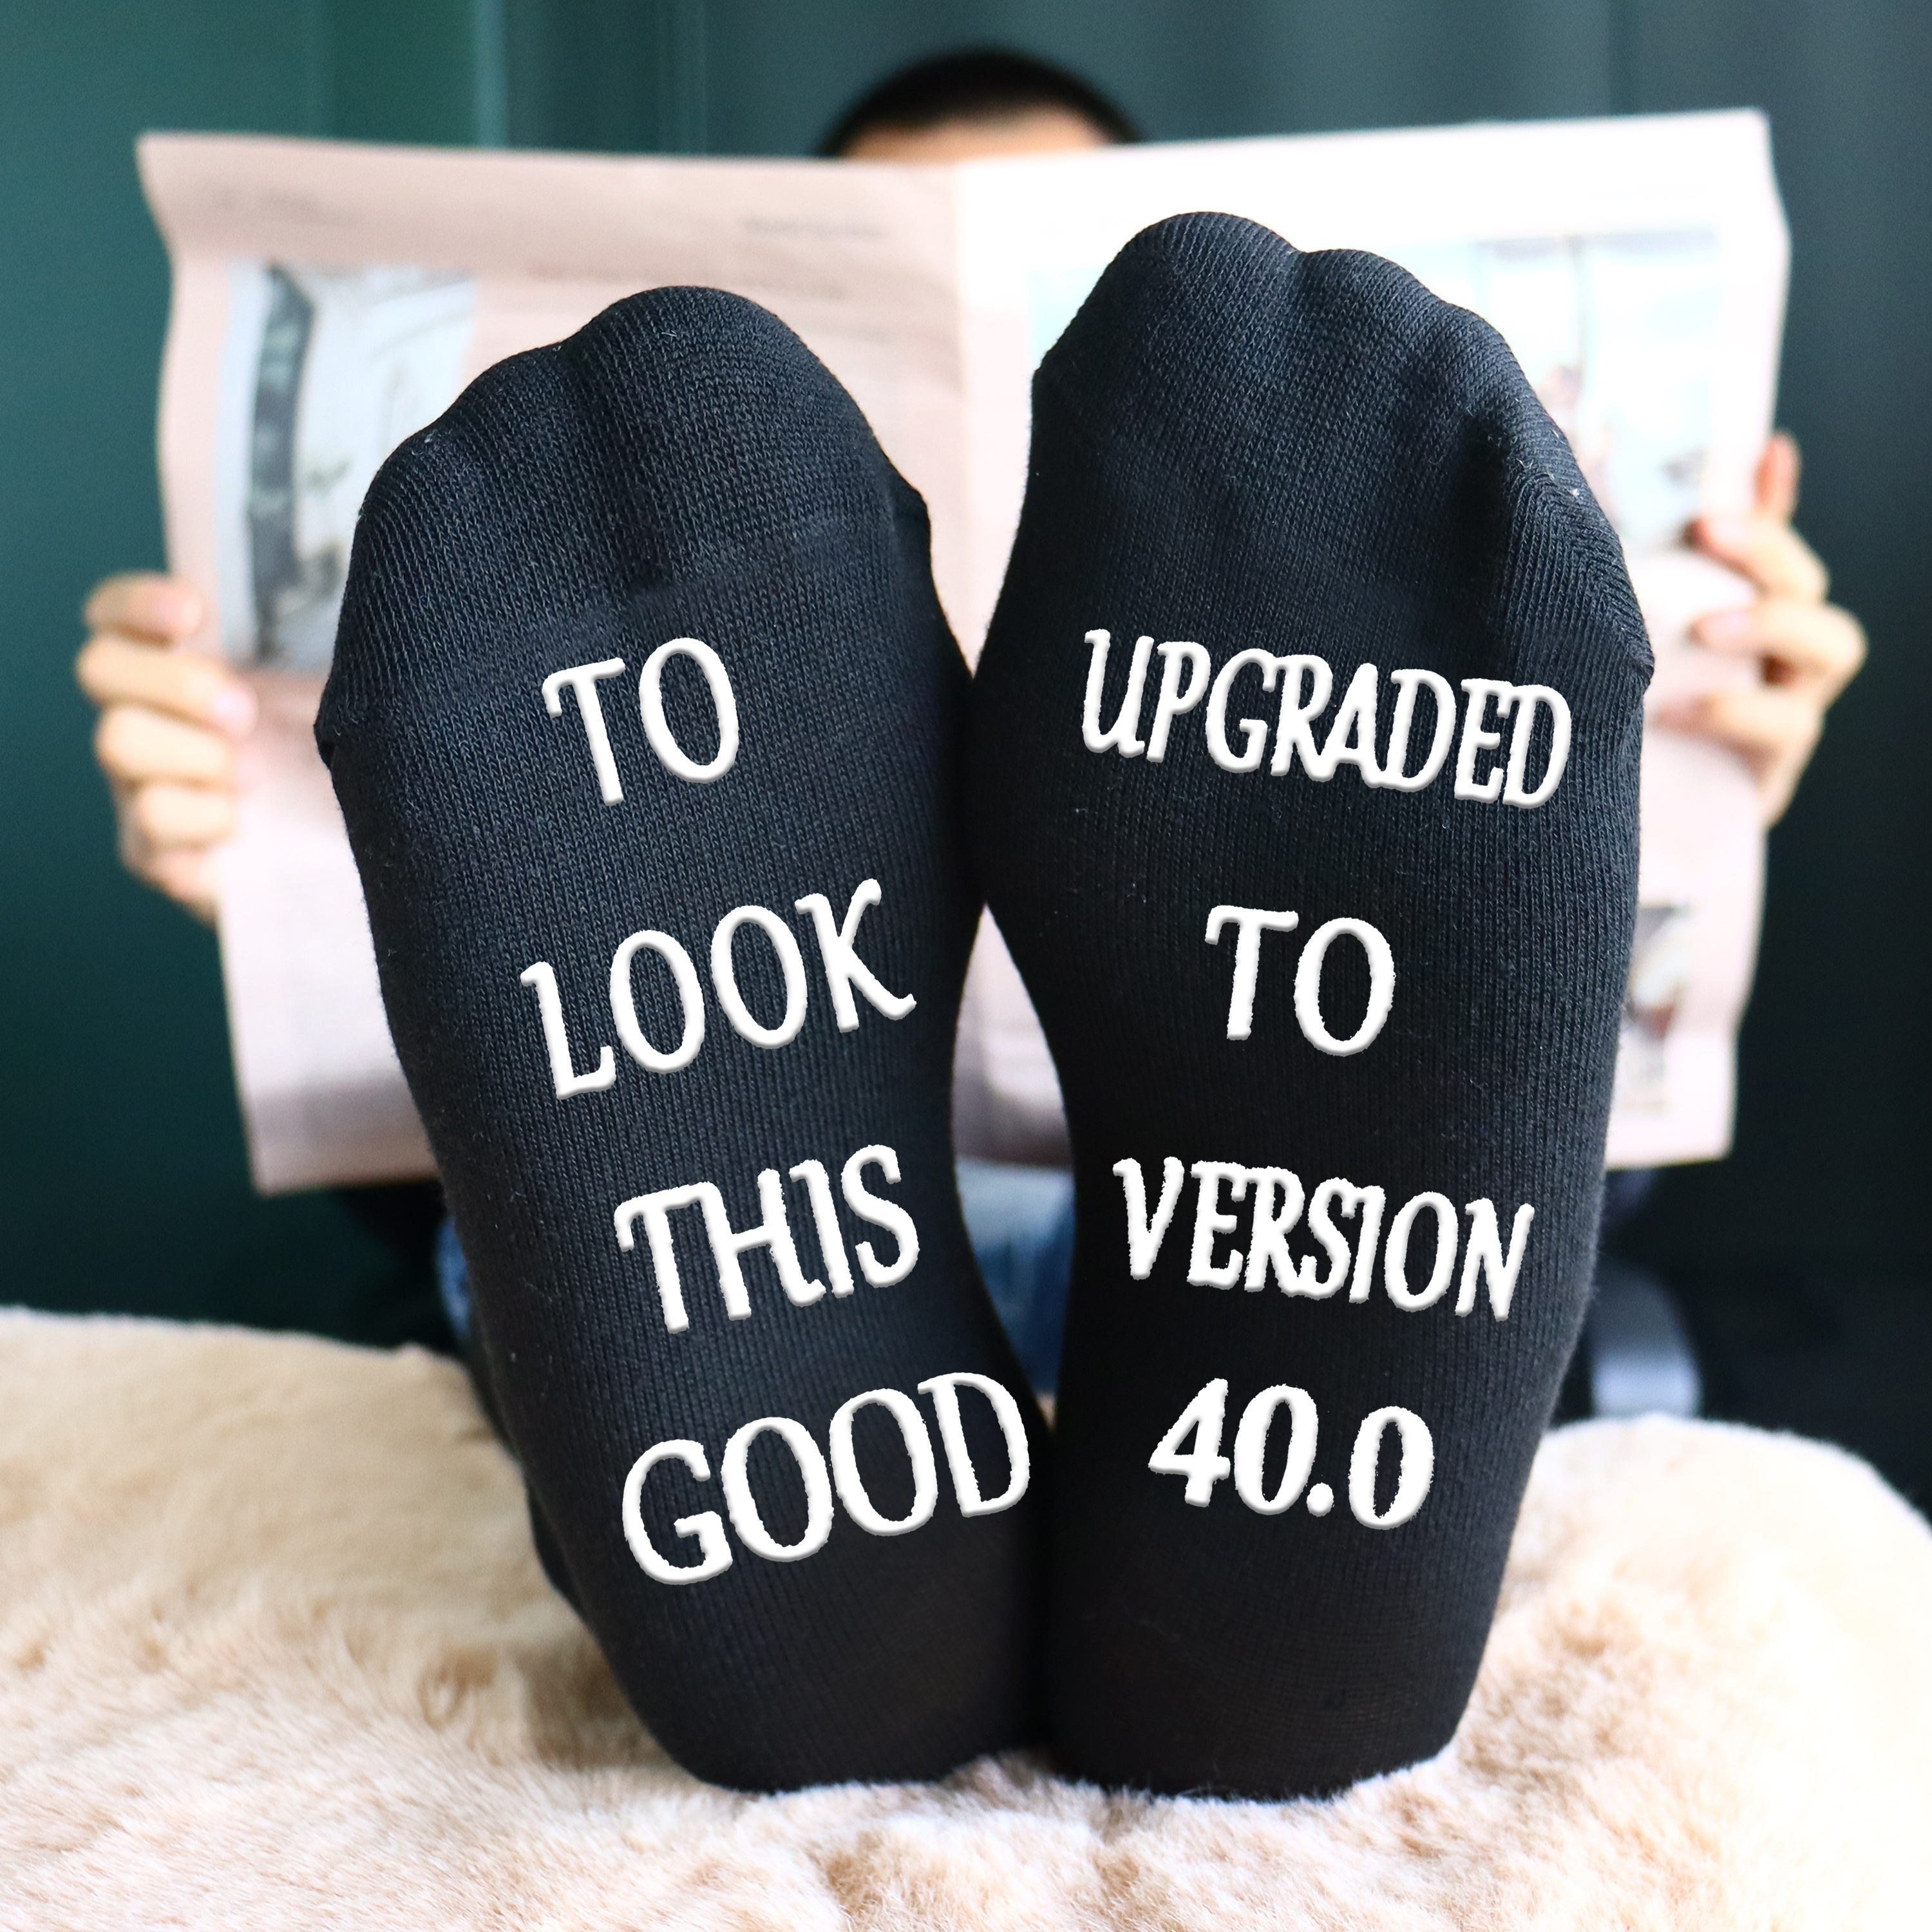  40th Birthday Present Made In 1983 Happy Birthday Socks for Men  & Women 1-Pair Novelty Crew Socks : Clothing, Shoes & Jewelry